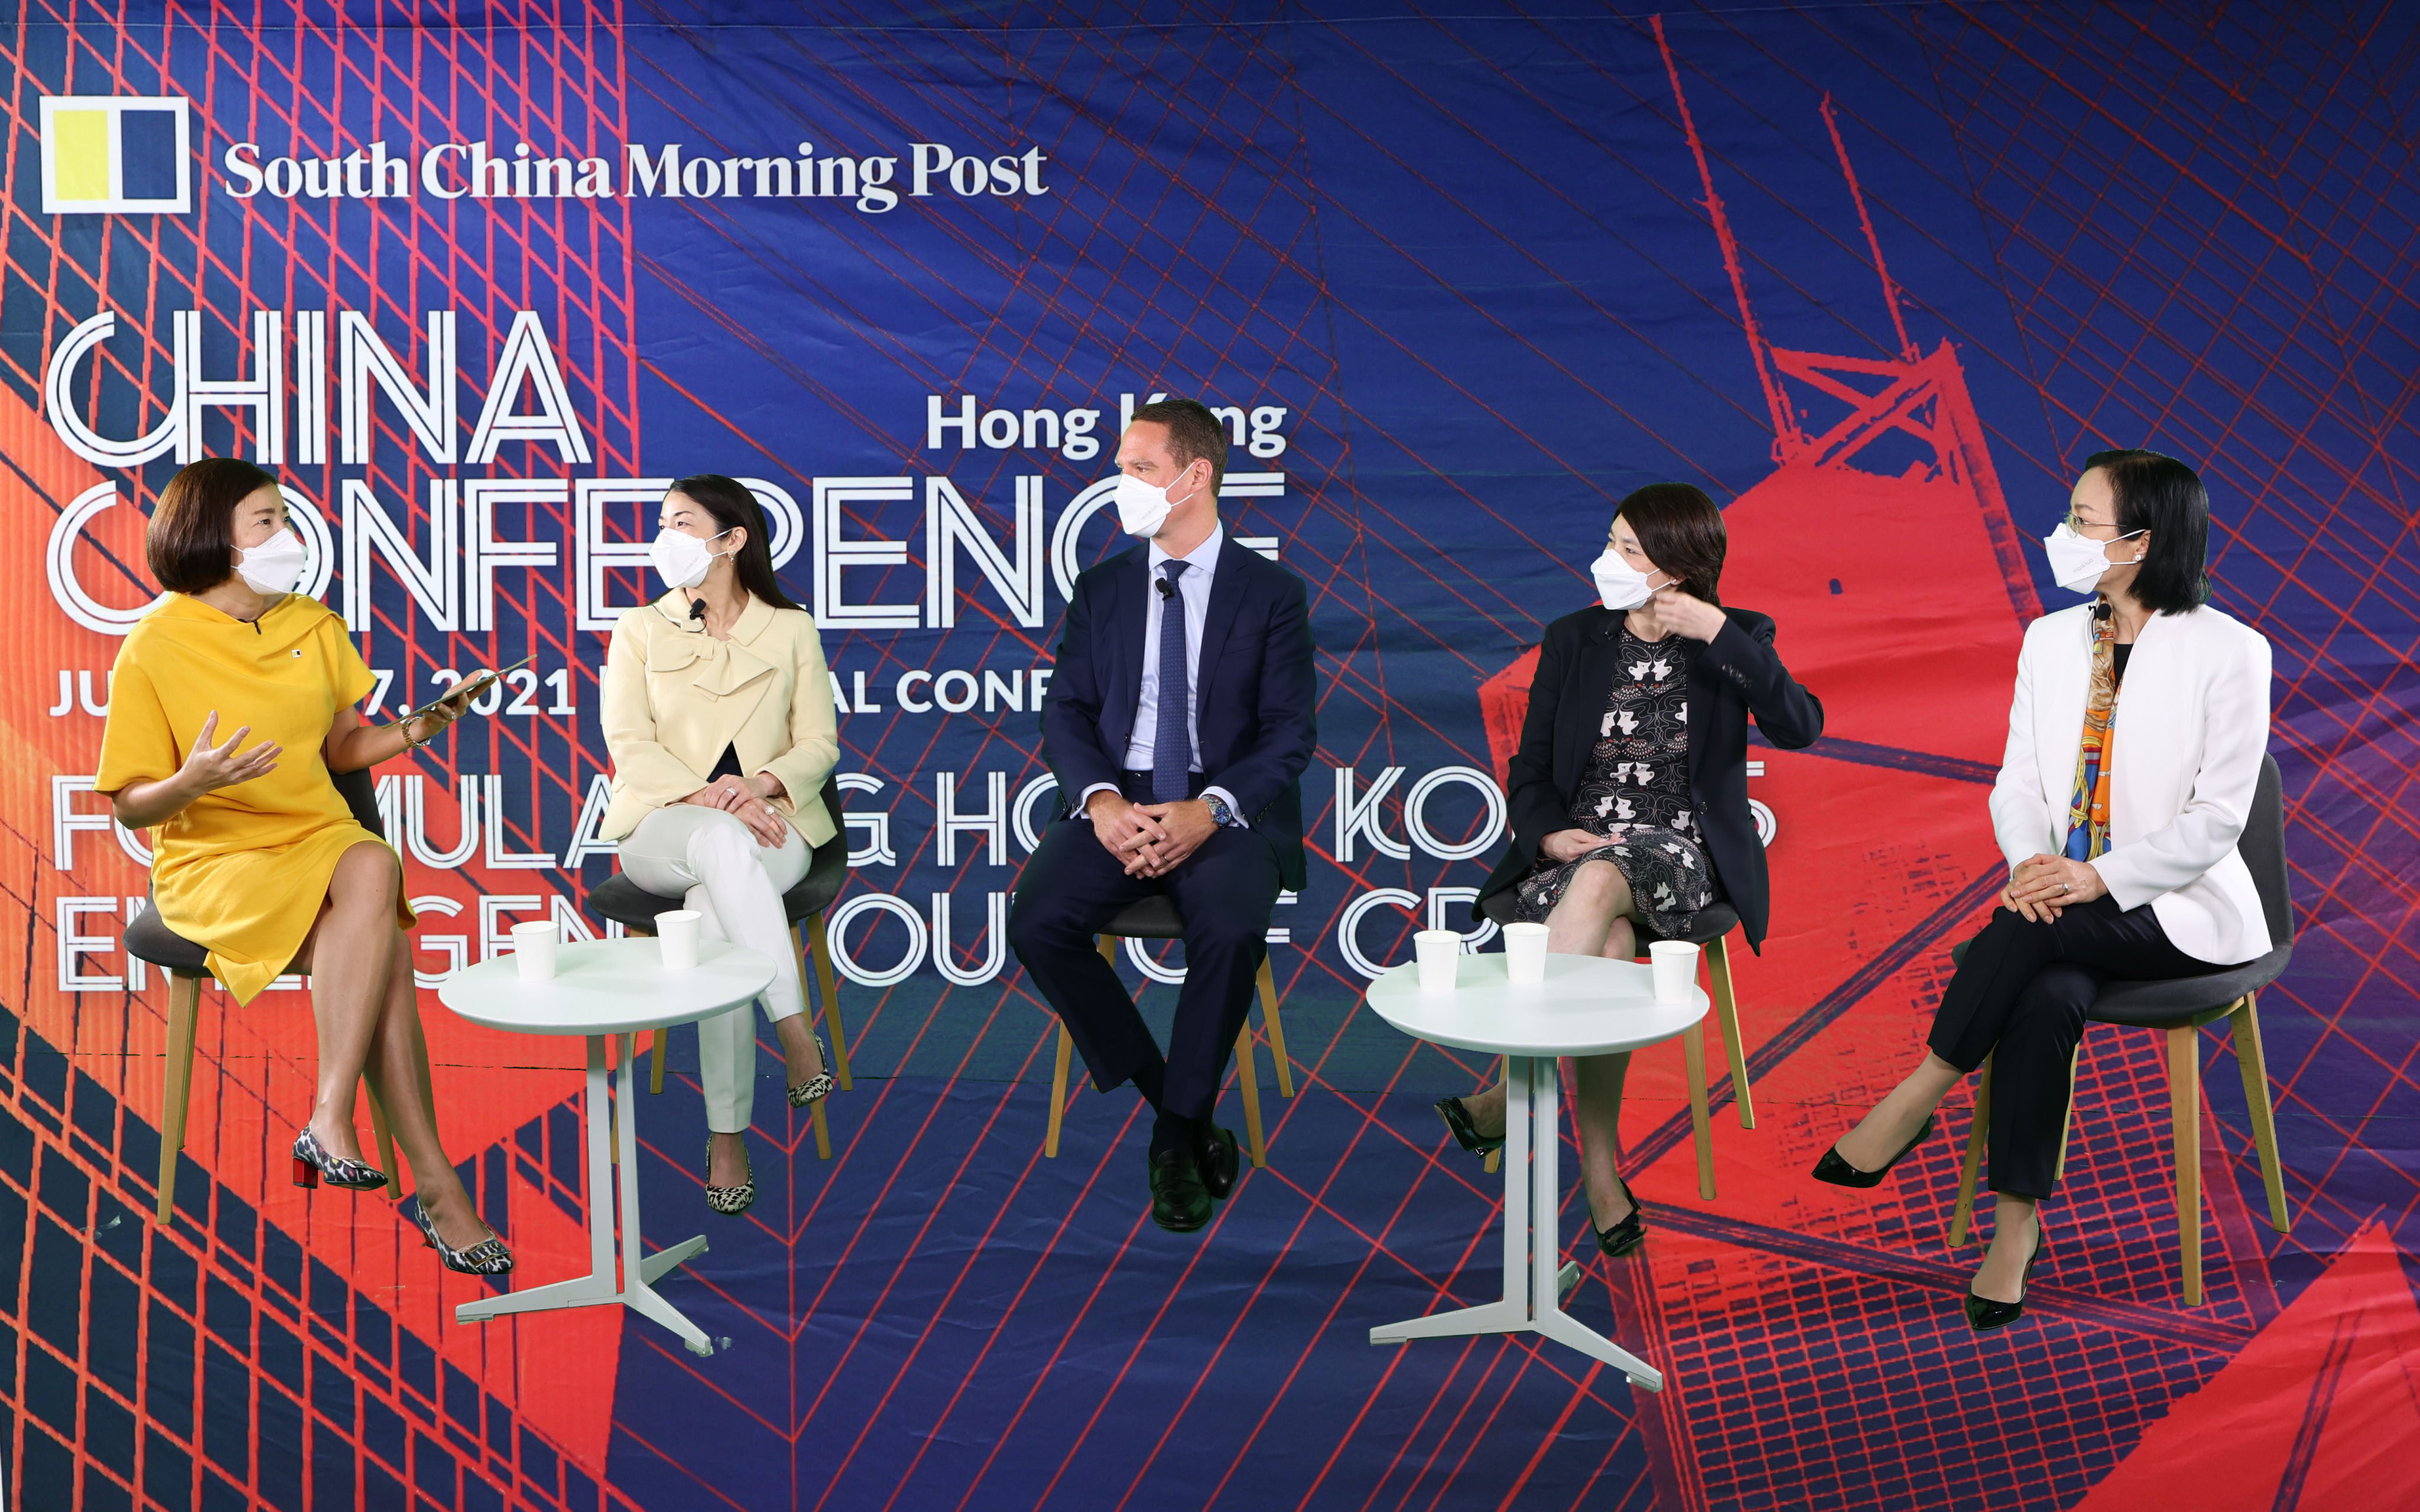 Post Hong Kong news editor Denise Tsang (far left) moderates a panel discussion with (left to right) Cynthia Chung of Deacons, Tom Gaffney of CBRE Hong Kong, Joanne Ho of Fung Group and Hong Qiu of Lazard Greater China. Photo: SCMP